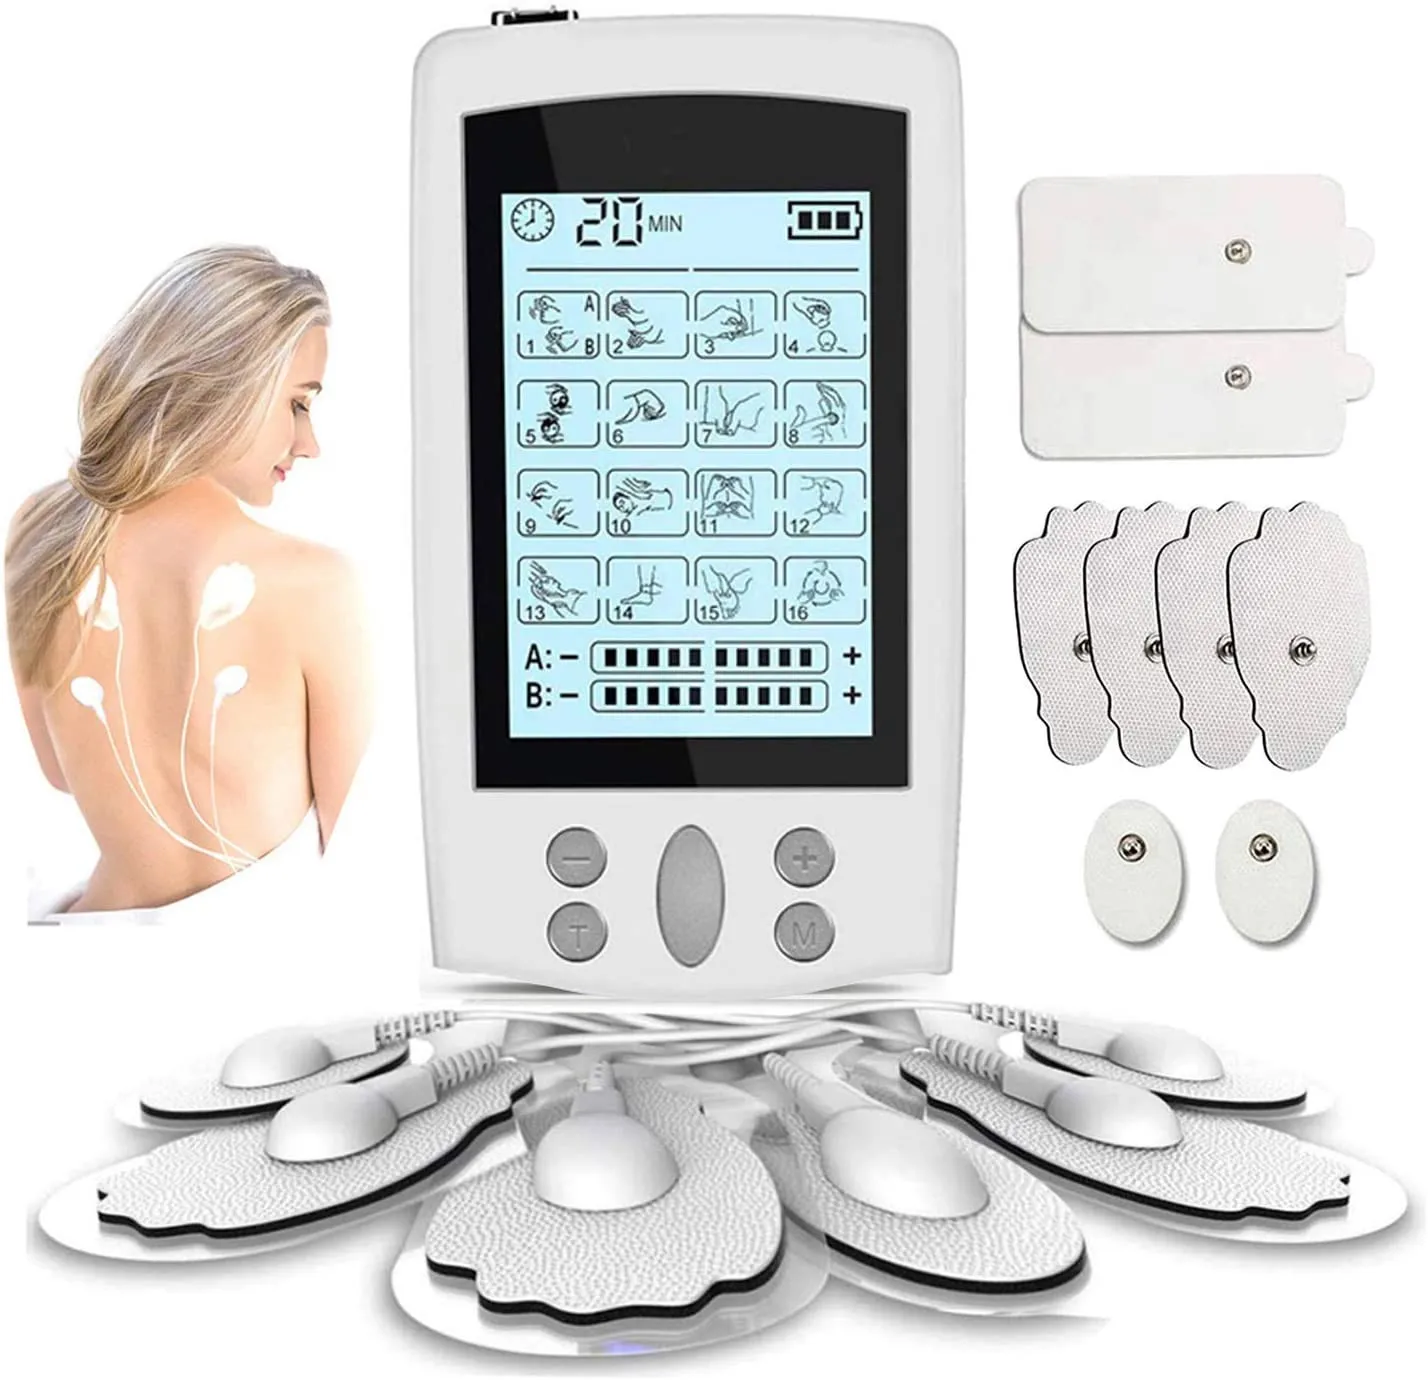 

Pulse Acupuncture Massage Therapy for Back Neck Electronic Tens EMS Muscle Stimulator Massager Health Care Full Body Relaxtion